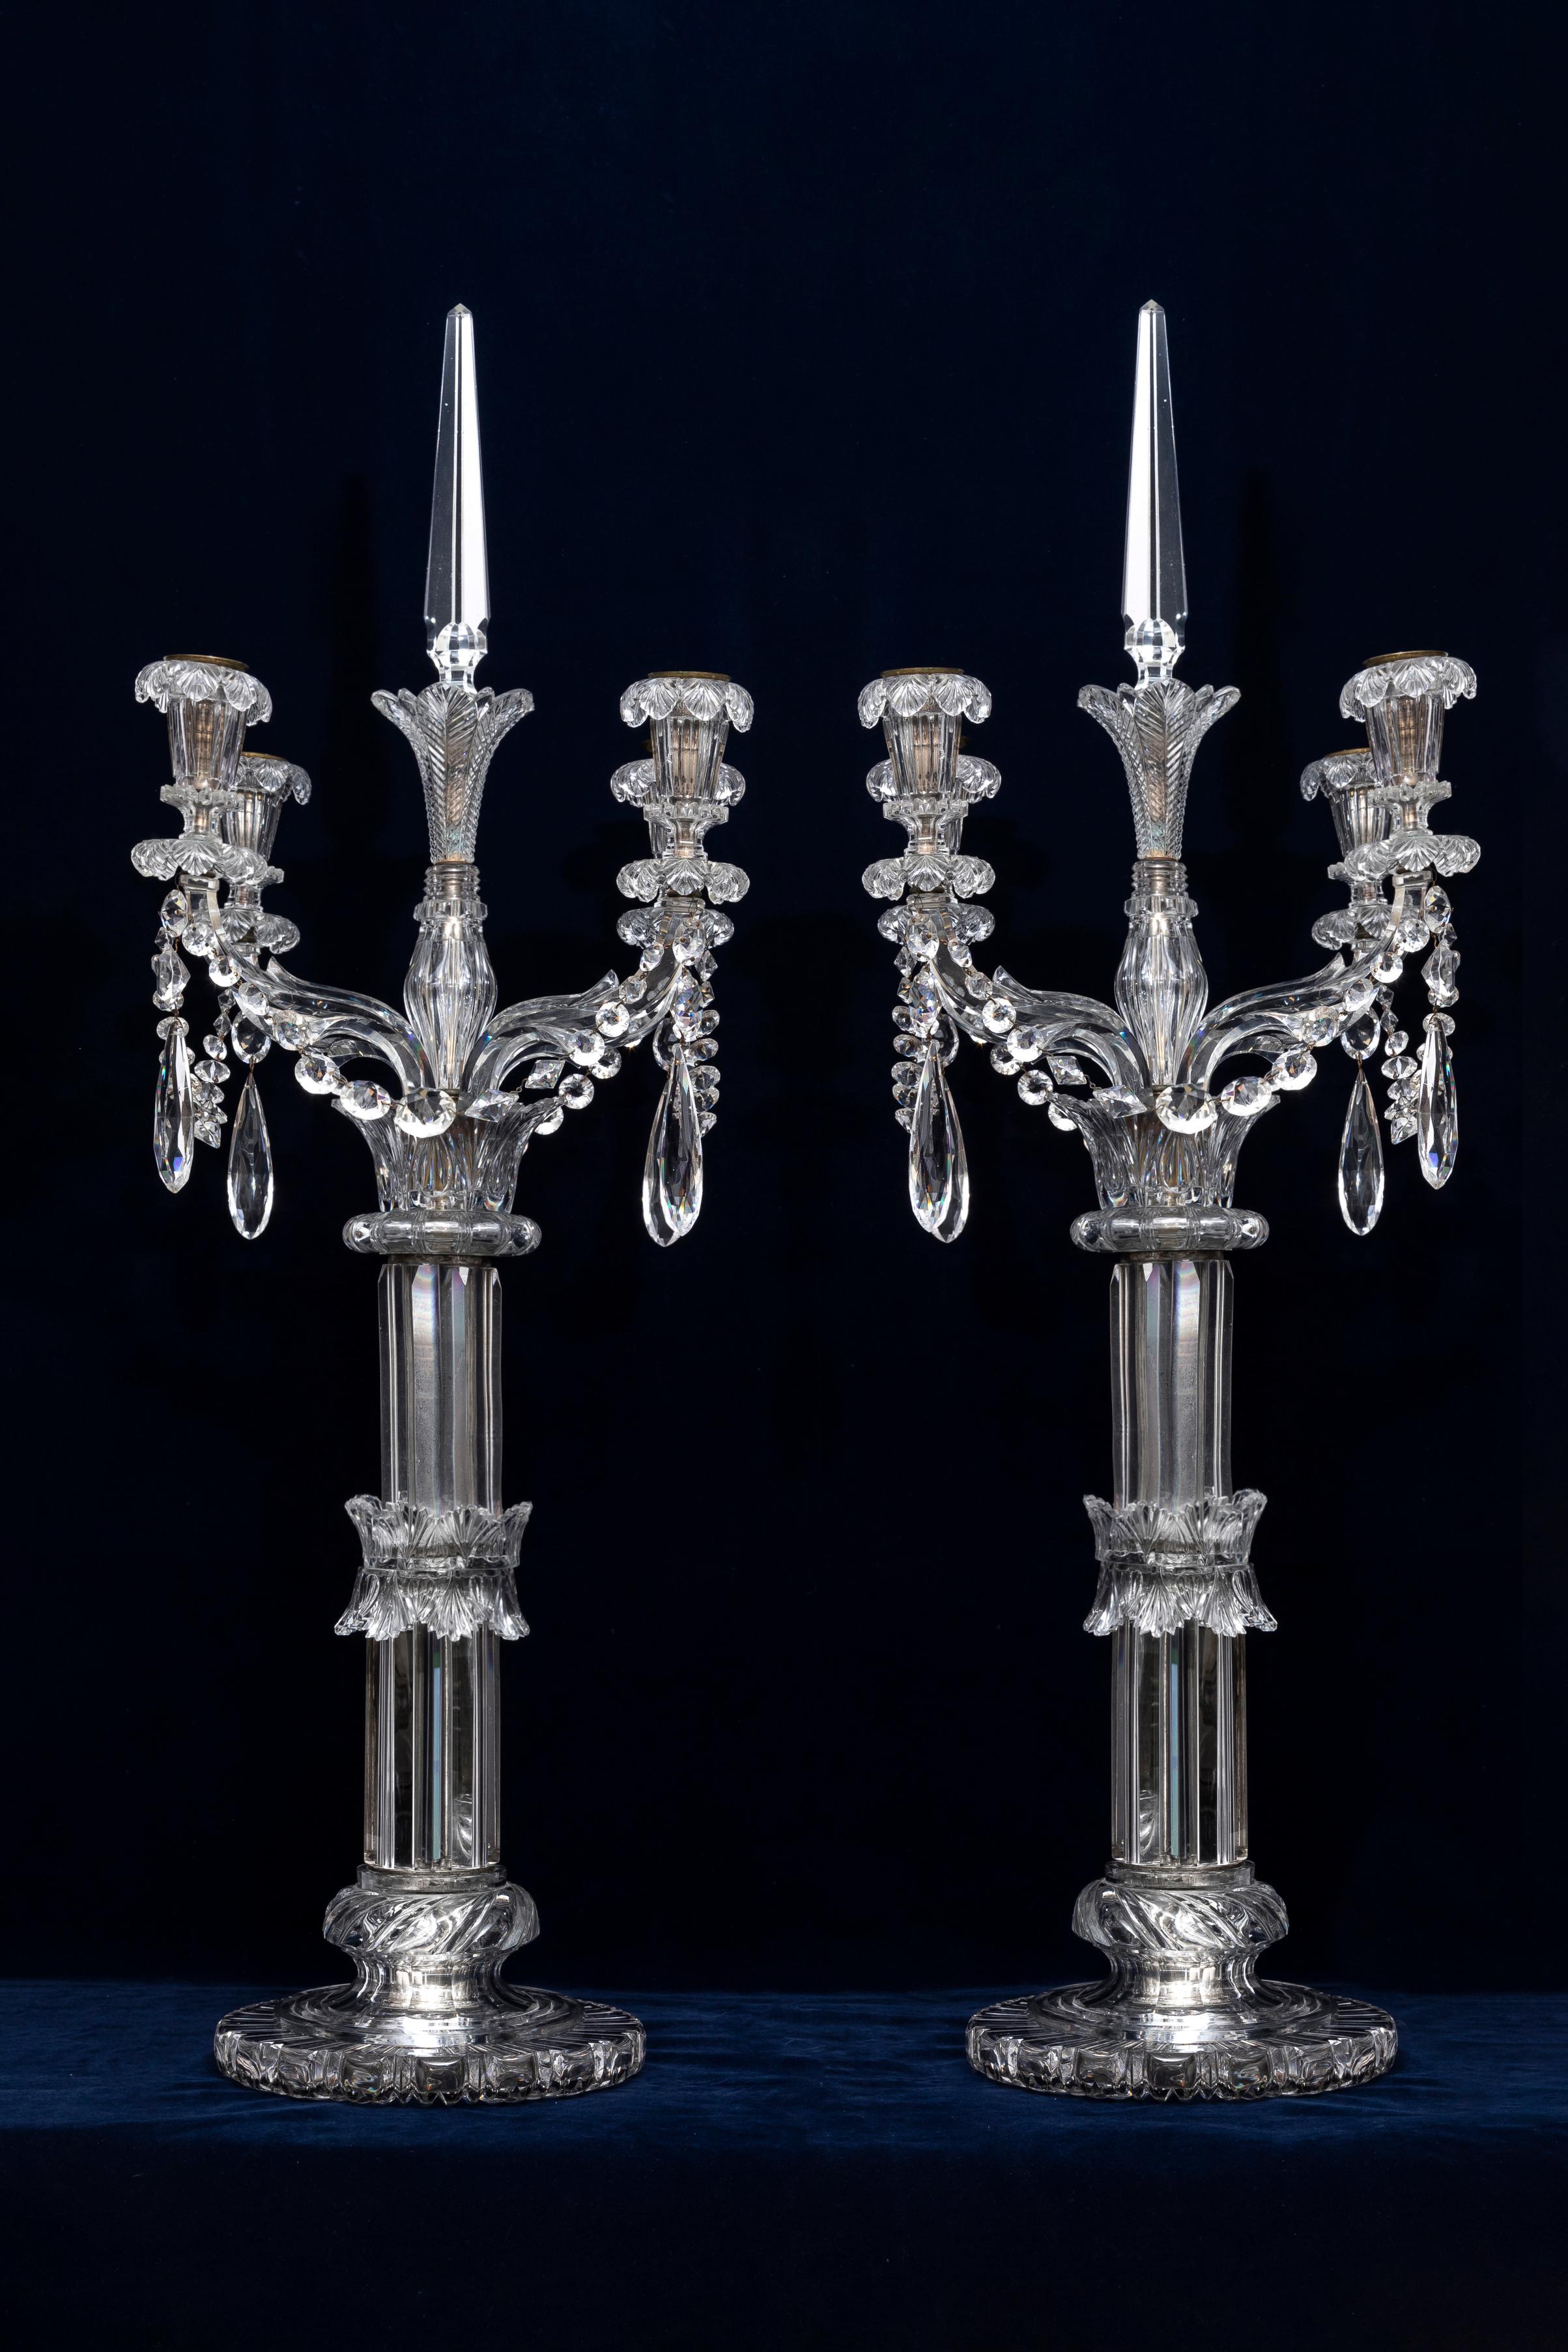 A Pair of 19th Century Monumental Palace Size Osler Four Light Crystal Torchères/Candelabras.  Each section is super finely hand-carved and hand-cut from the finest and most dense crystal of the time.  Each arm and the the finial prism are made up